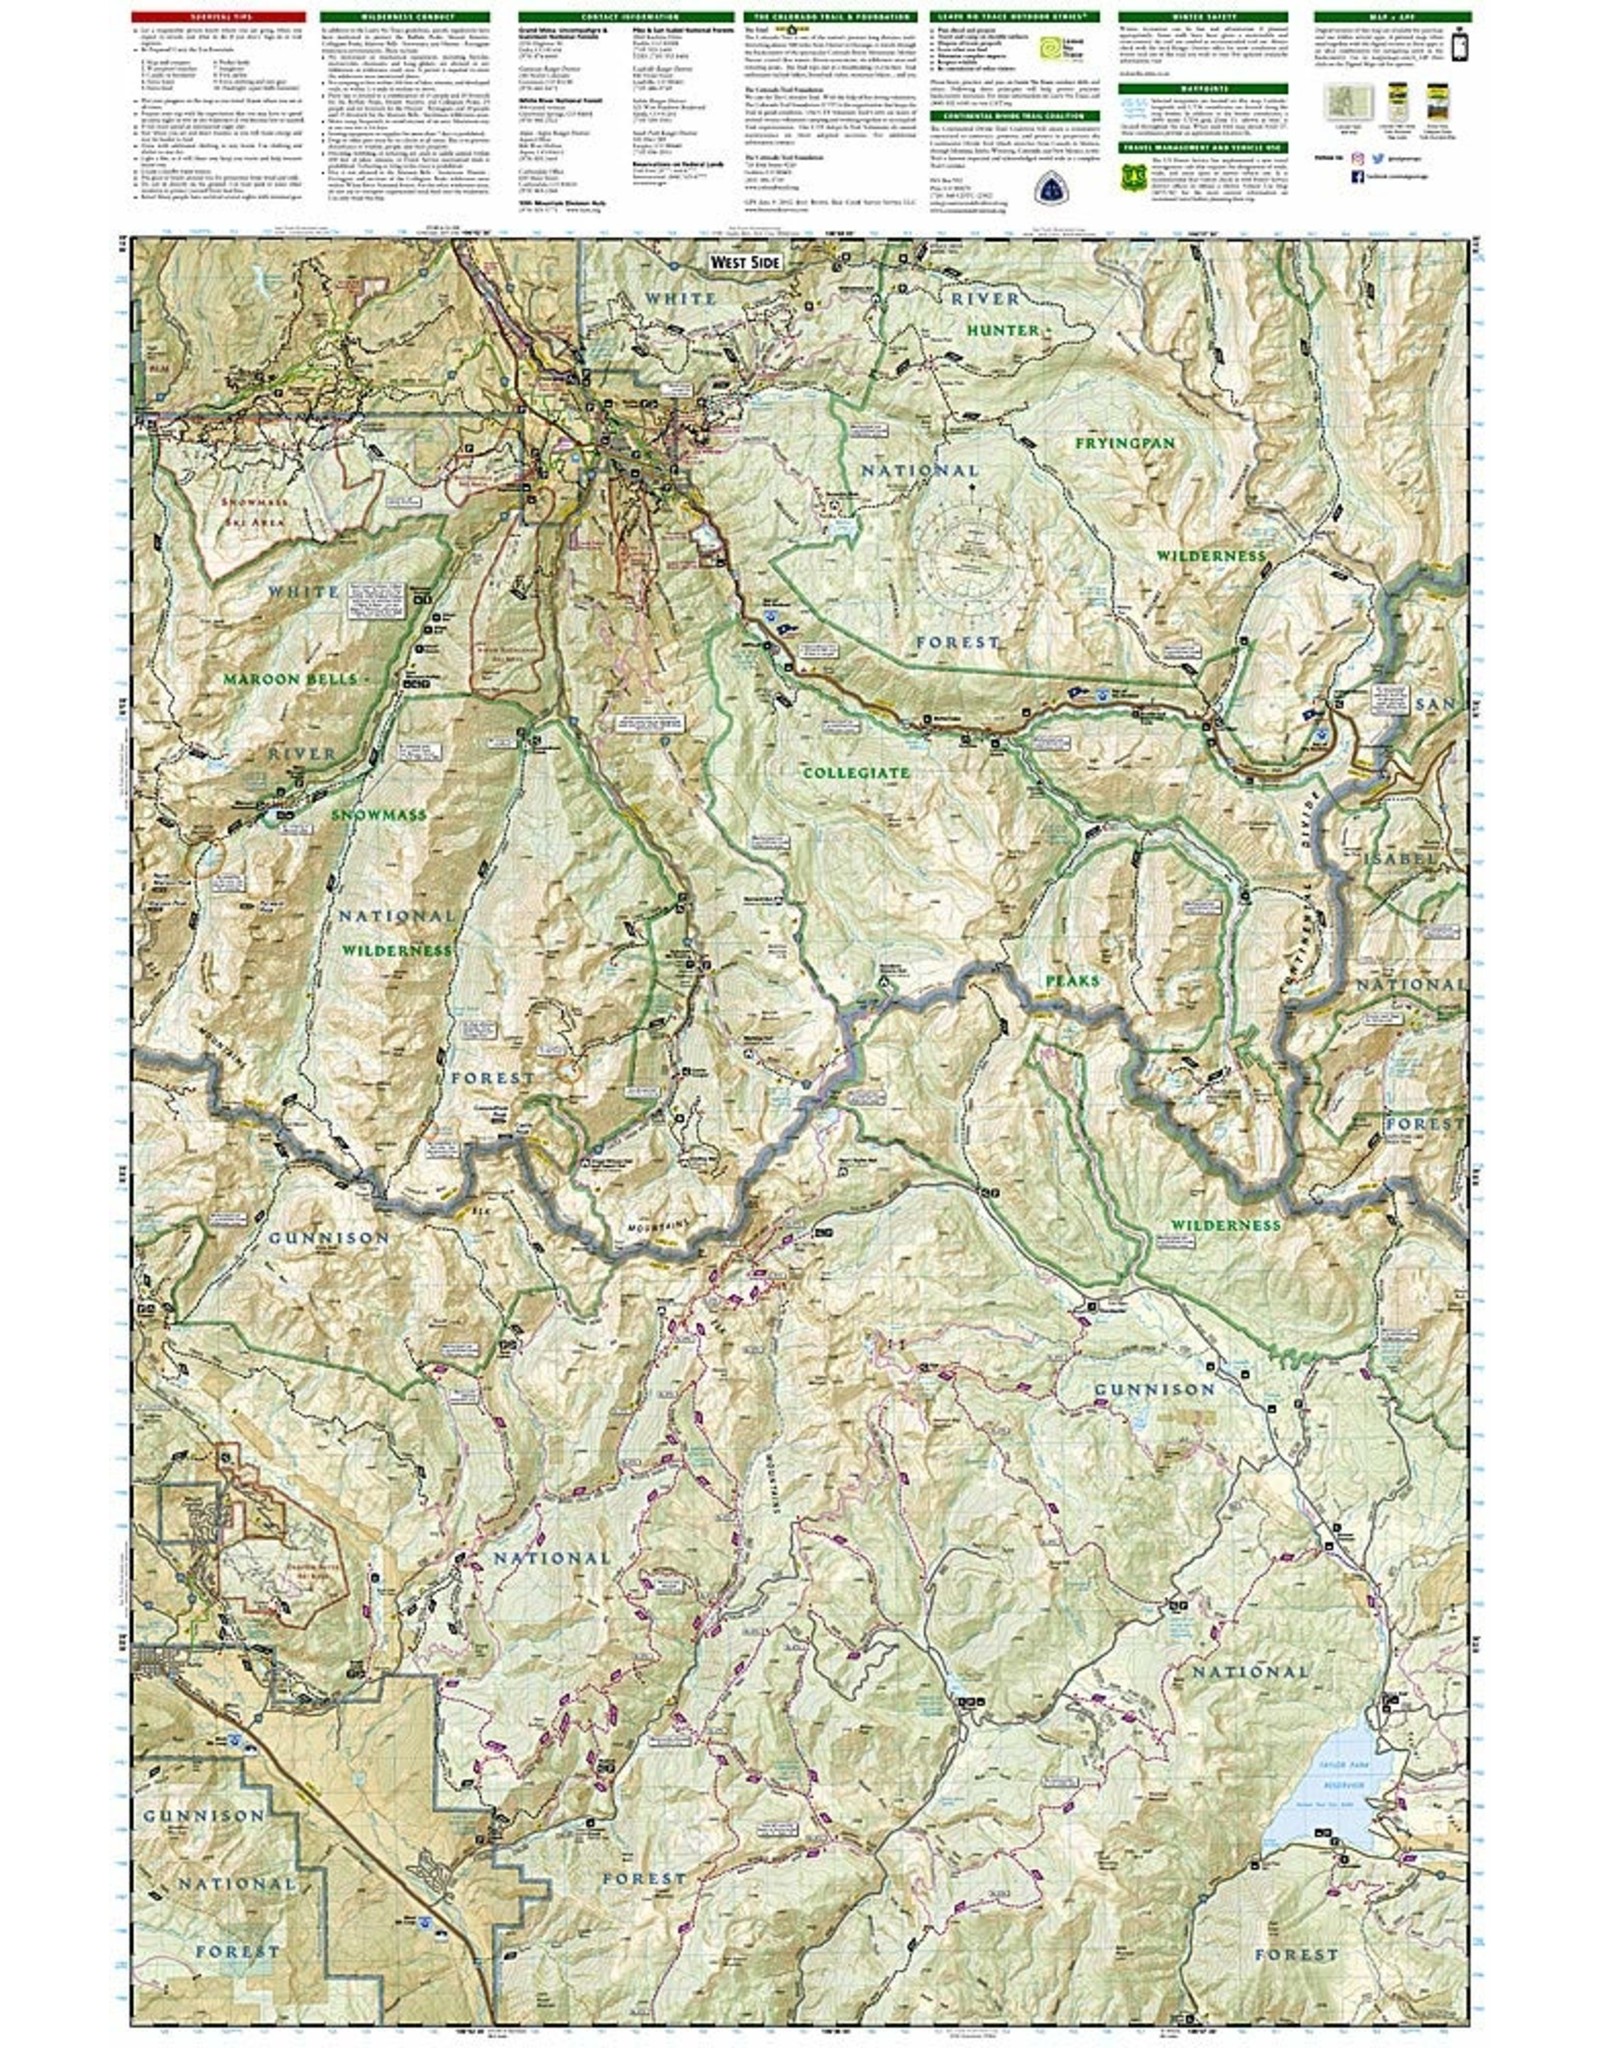 Collegiate Peaks Wilderness Area (National Geographic Trails Illustrated Map, 148) Map – Folded Map